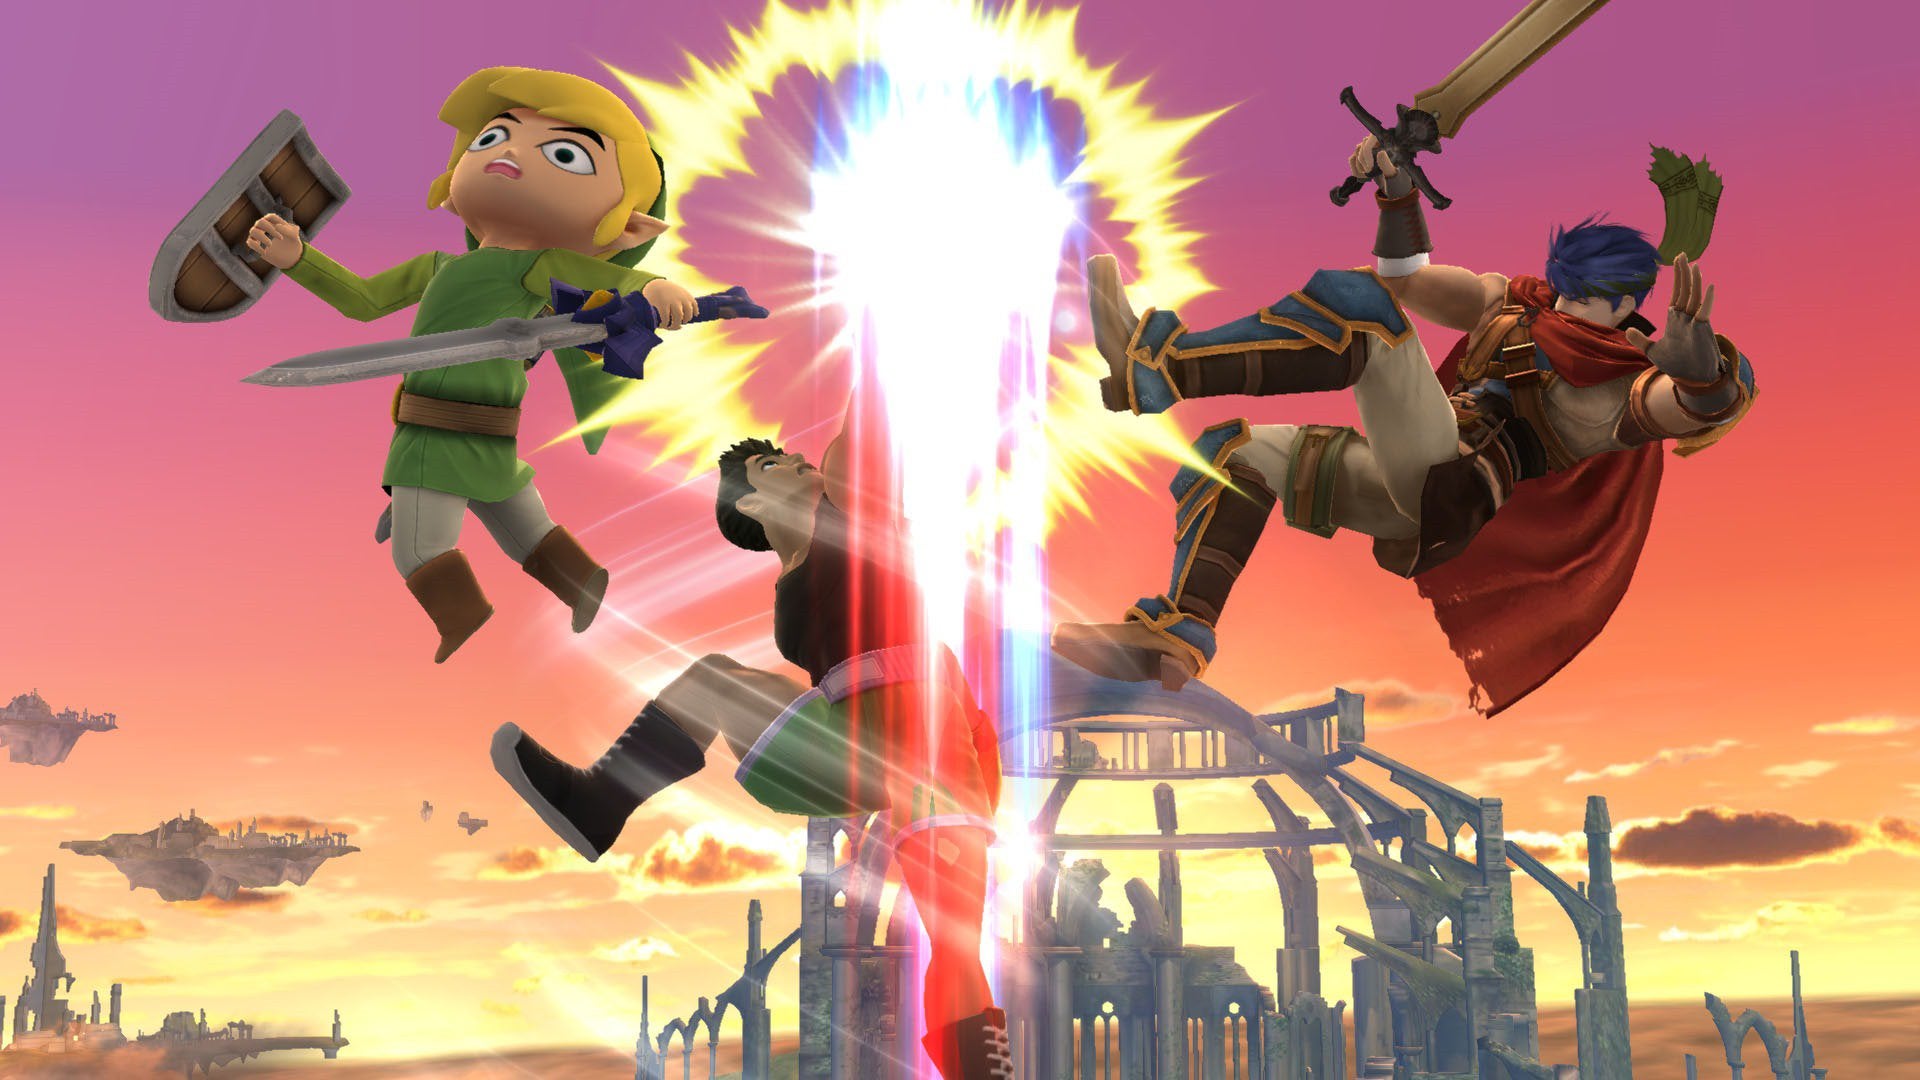 Image for Super Smash Bros. briefing coming before E3 2015 